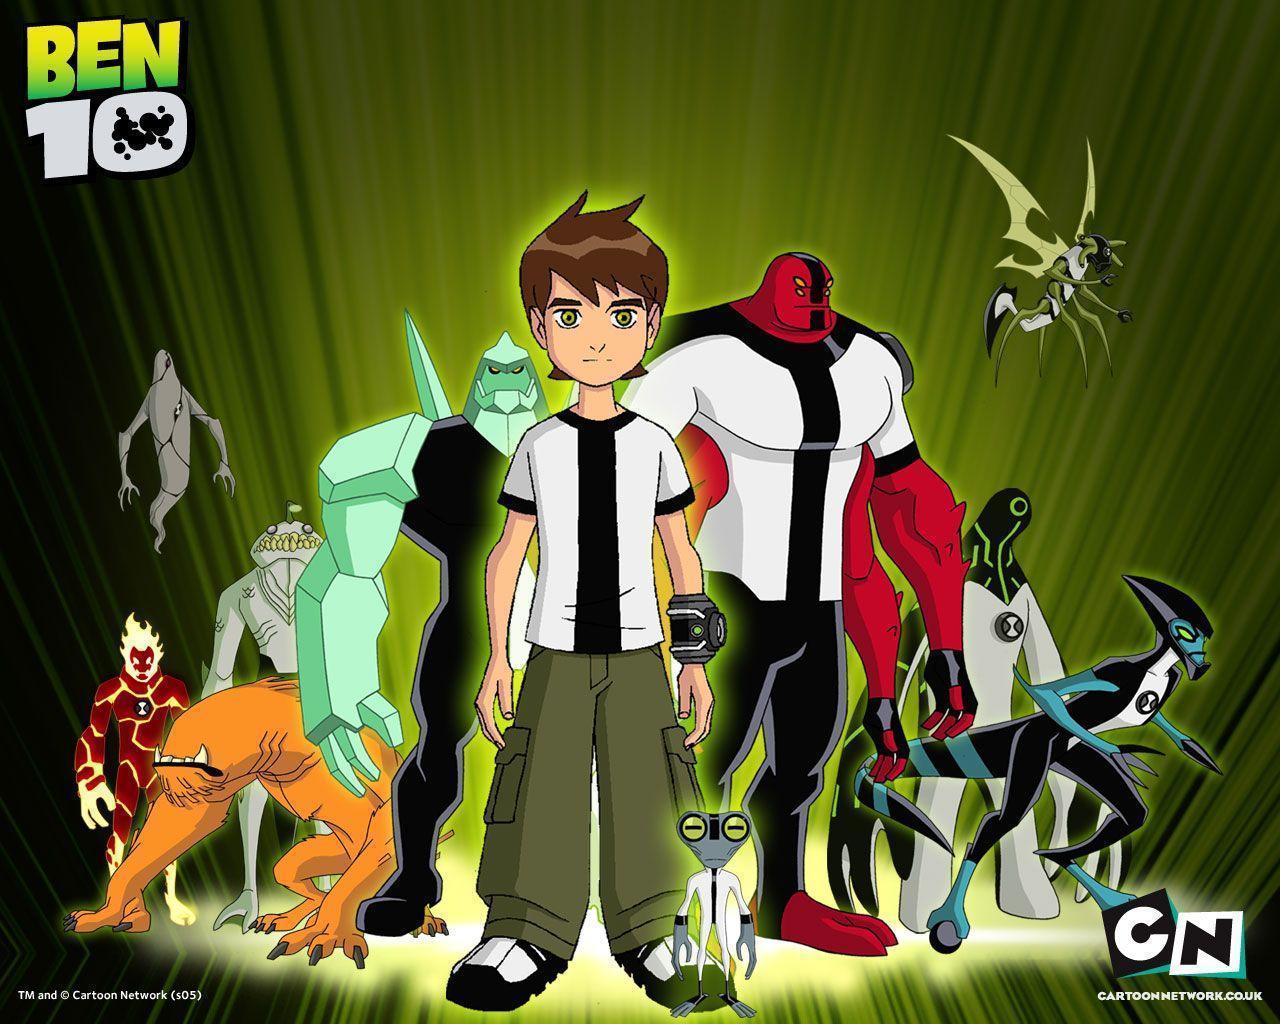 Ben 10: Cartoon Network To Revive Animated Series